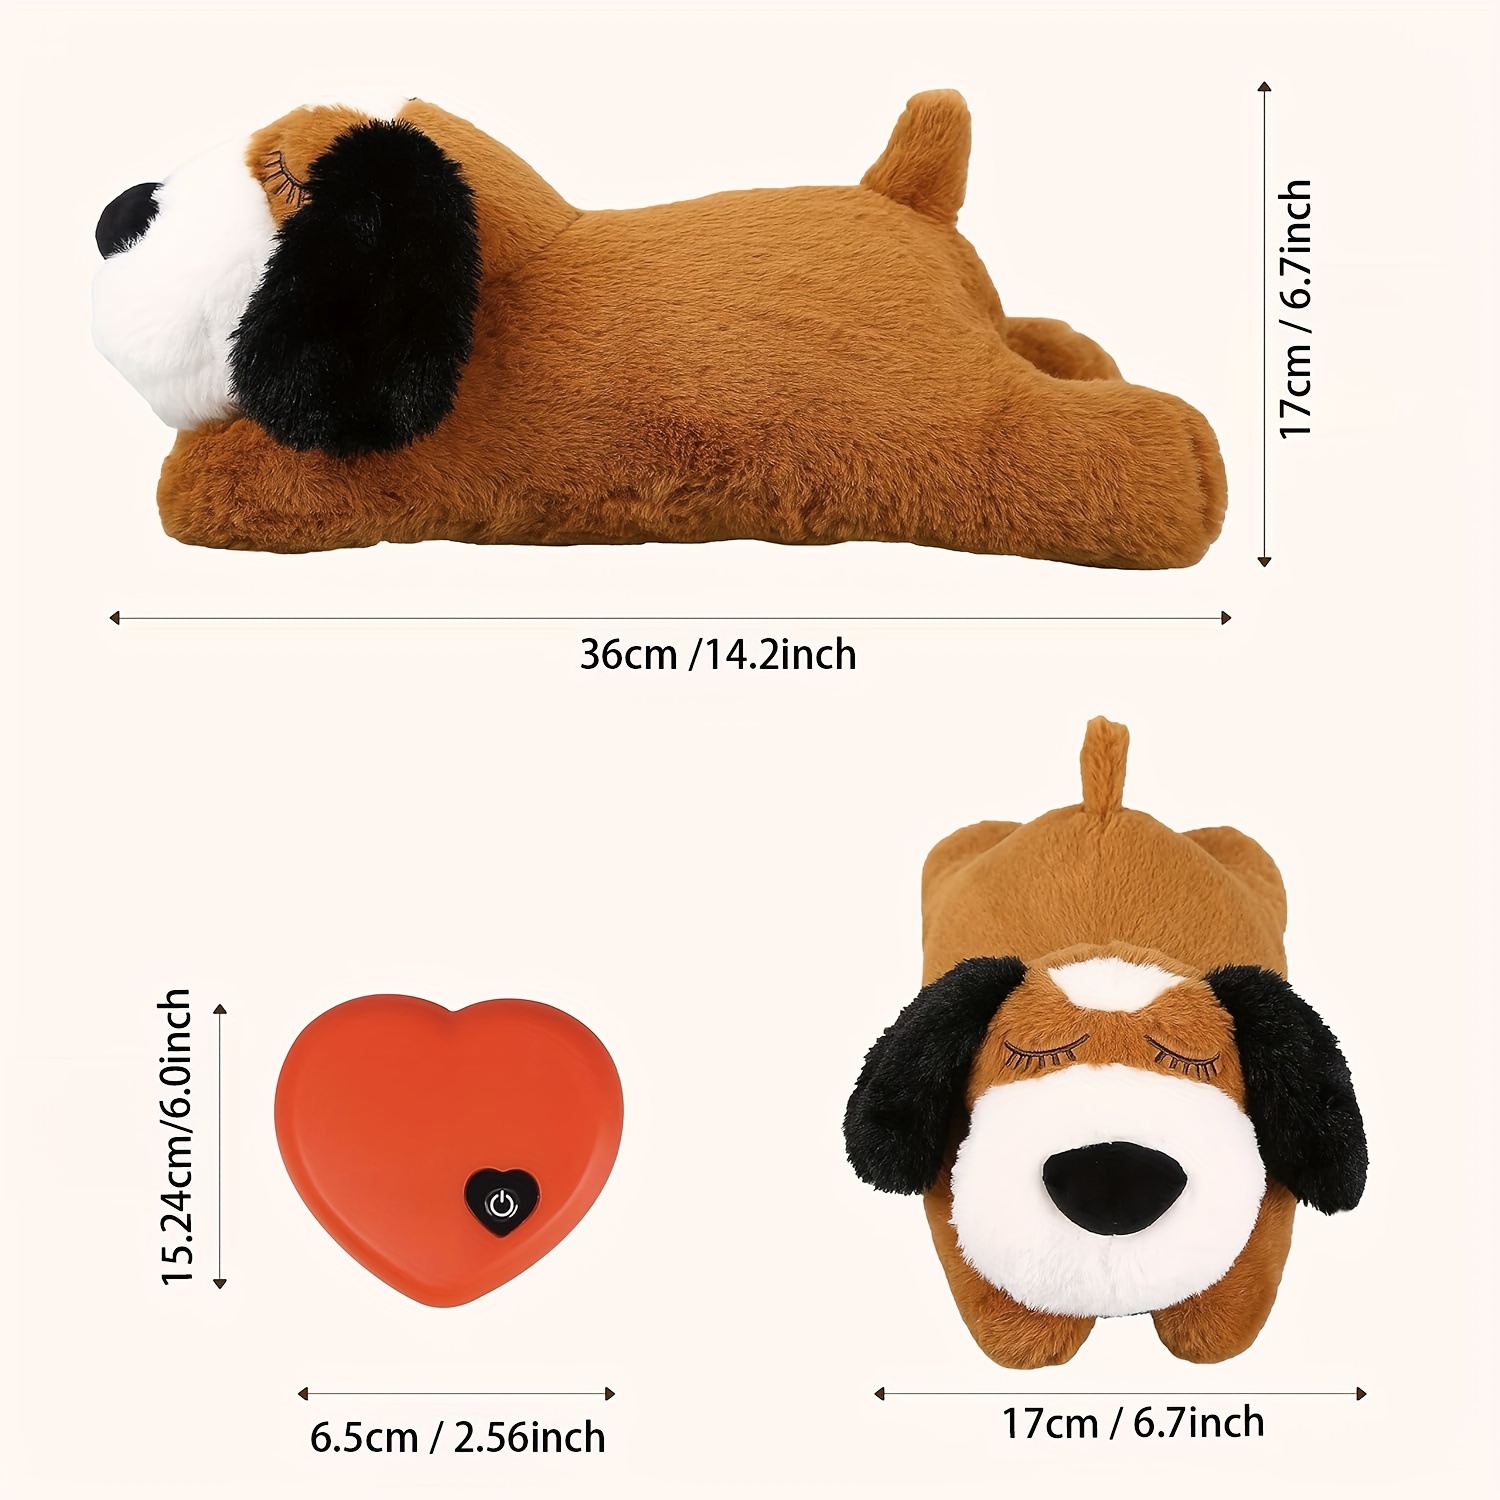 WEOK Puppy Heartbeat Toy, Dog Heartbeat Toy for Separation Anxiety Relief,  Puppy Toy with Heartbeat Stuffed Animal Anxiety Calming Behavioral Aid